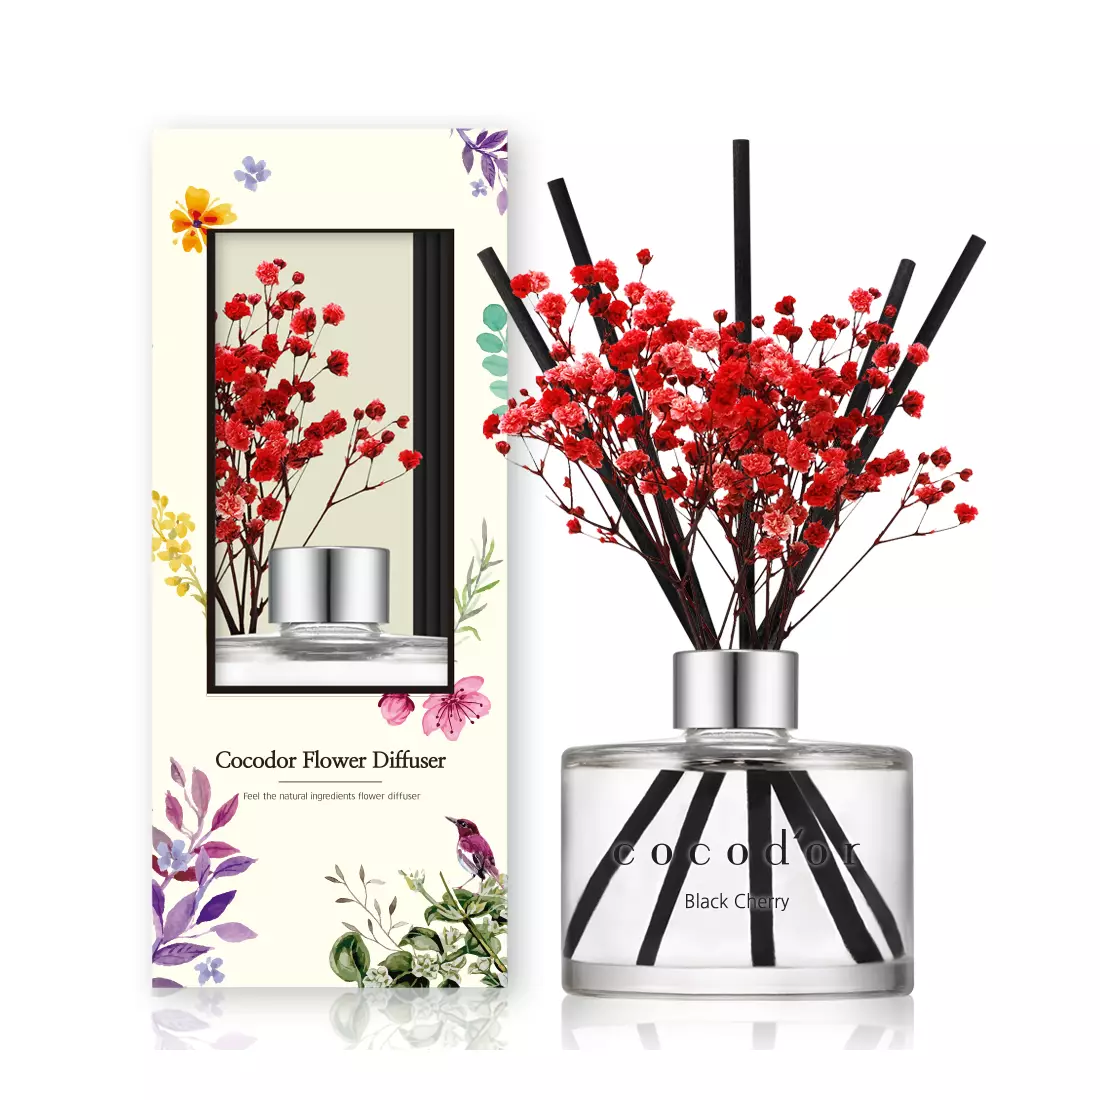 COCODOR aroma diffuser with sticks and flowers, black cherry 120 ml